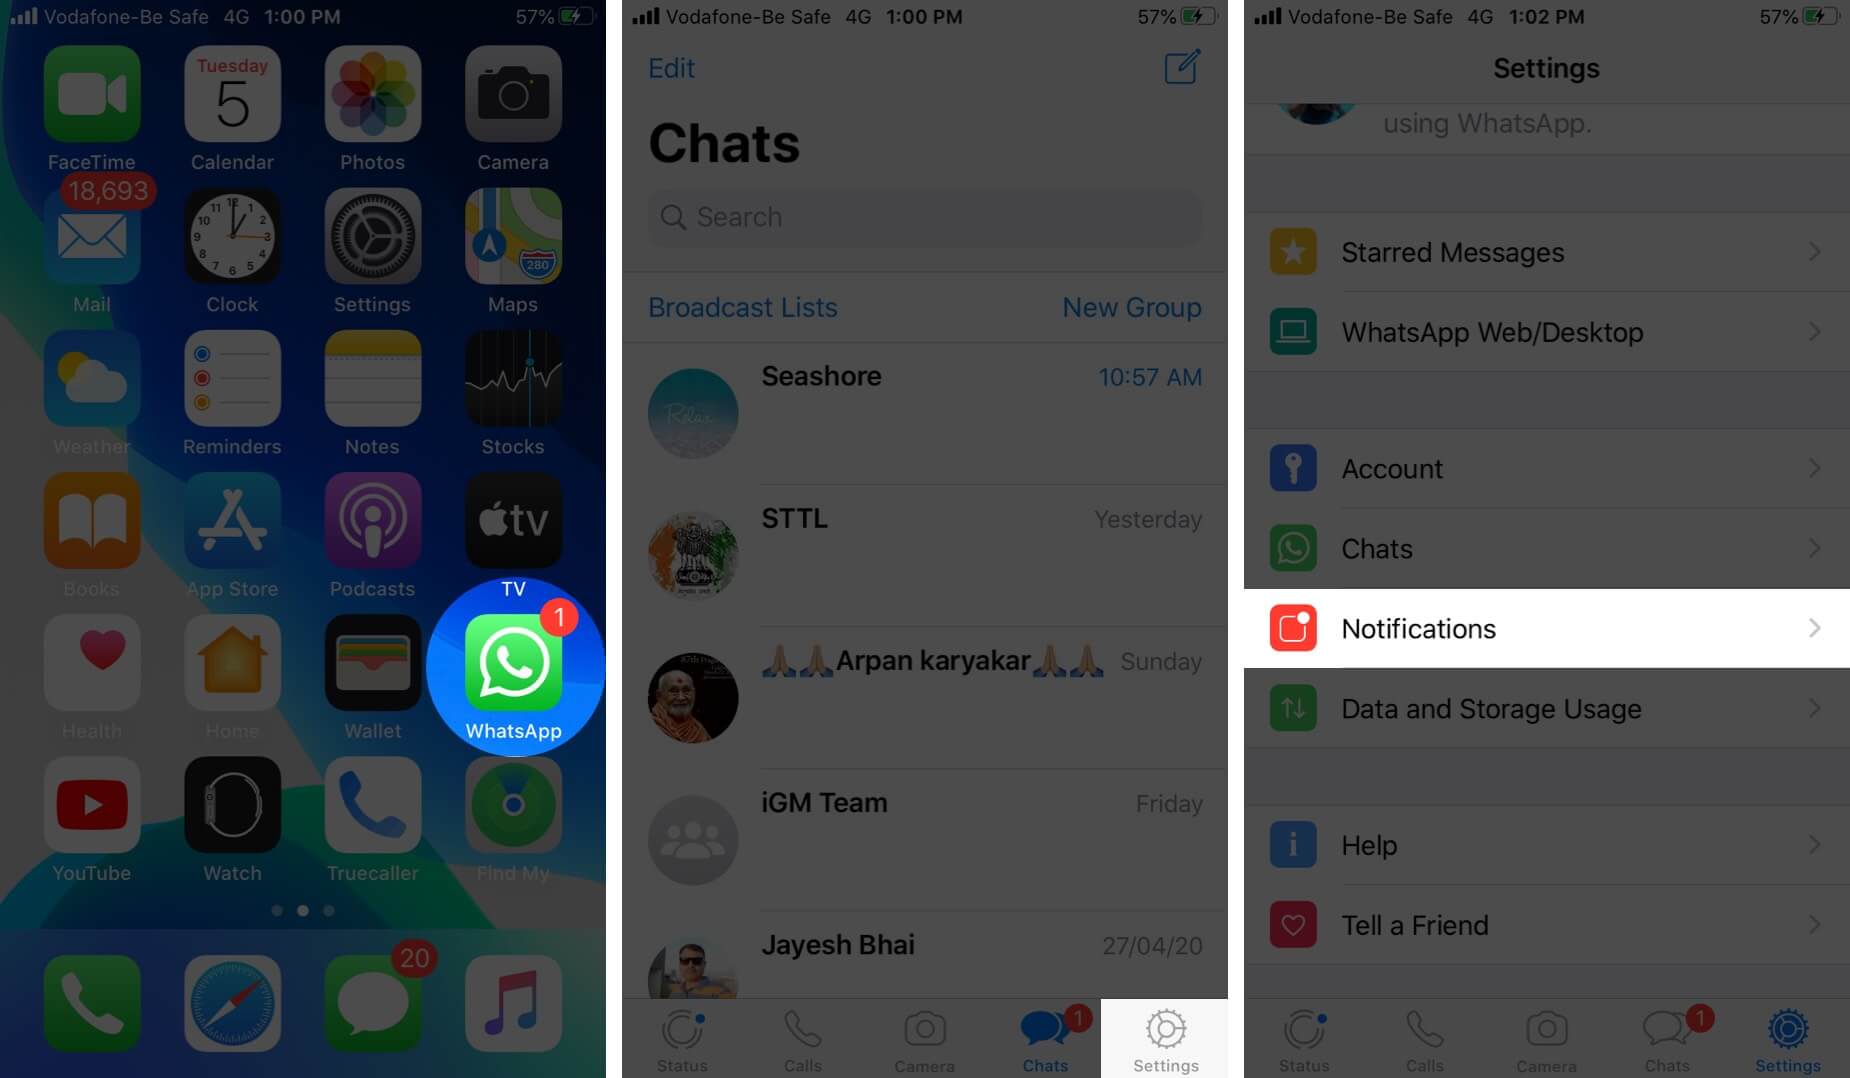 Open WhatsApp Tap on Settings and Then Tap on Notifications